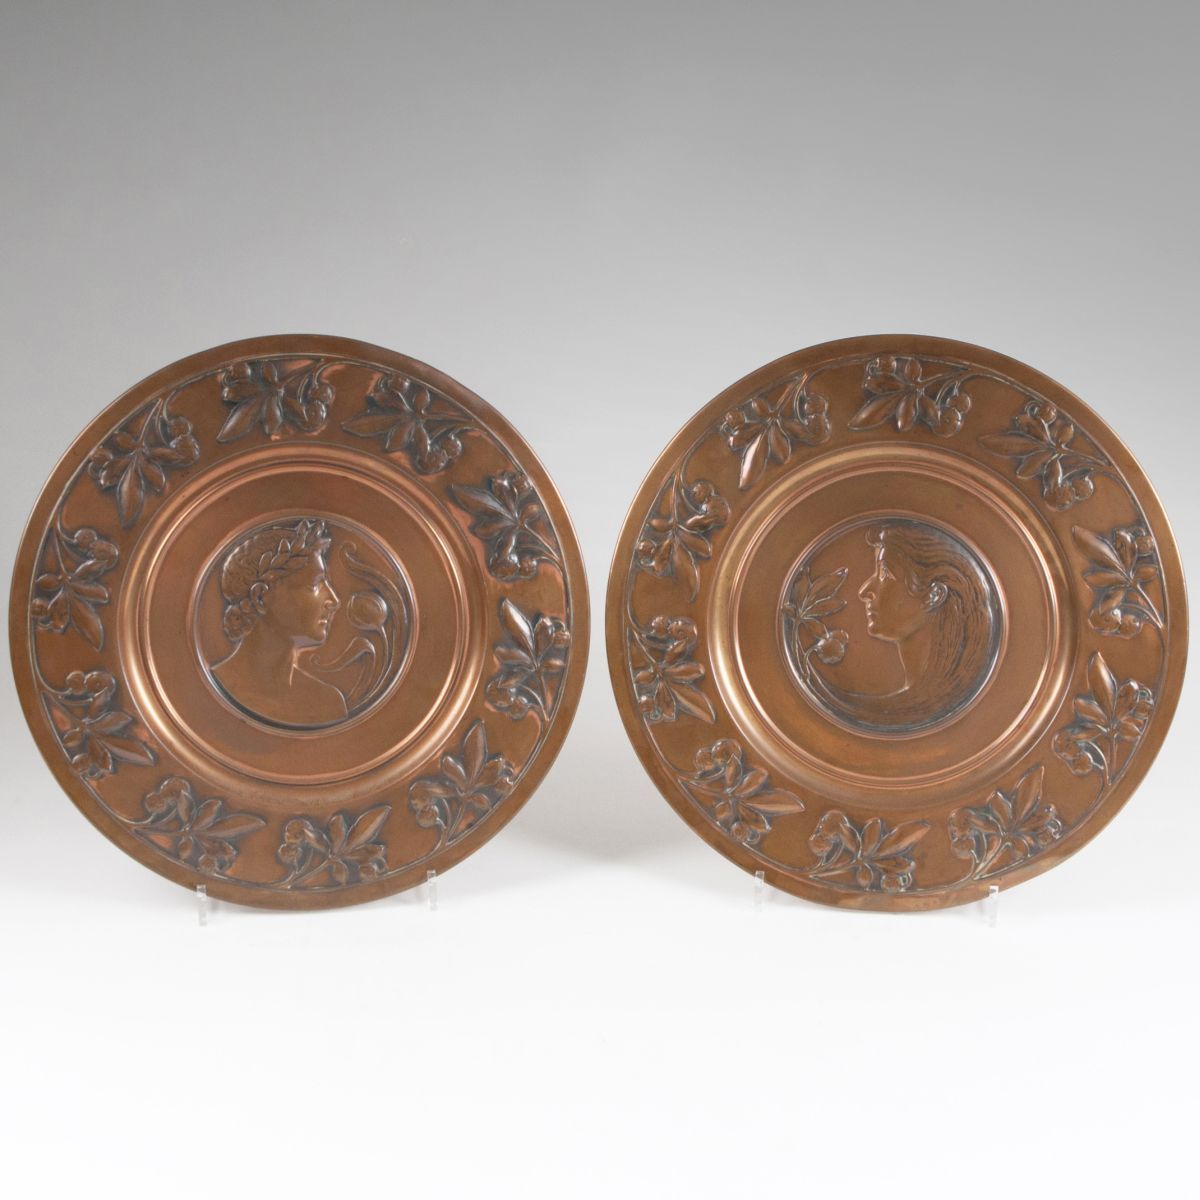 A pair of decorative WMF-wall plates with the heads of a young man and woman in profile